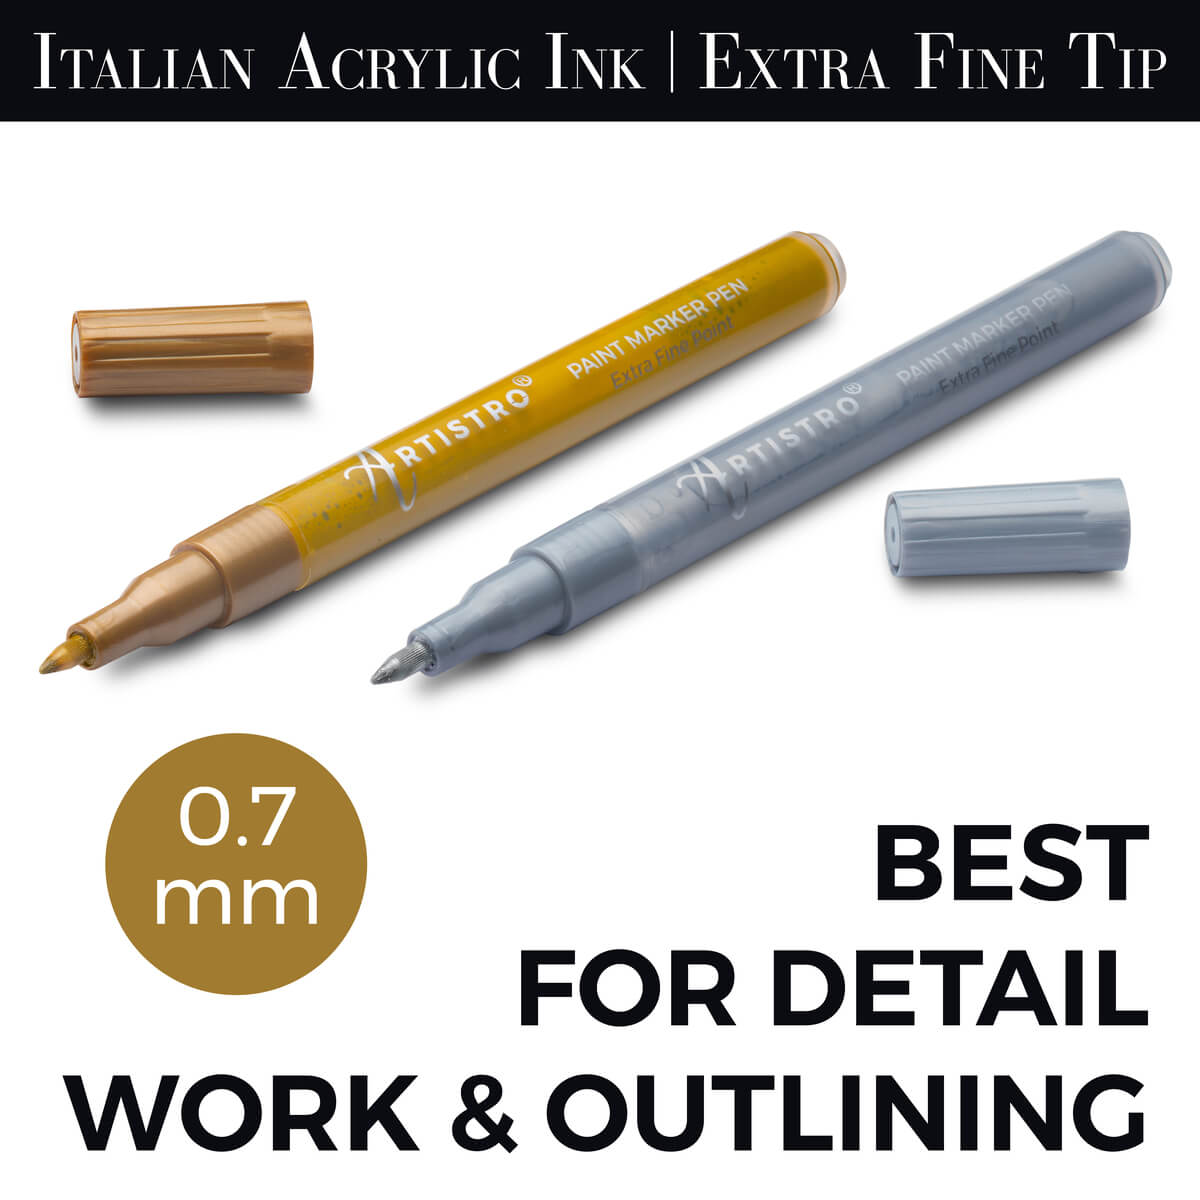 extra fine tip acrylic paint pen best for detail work and outlining